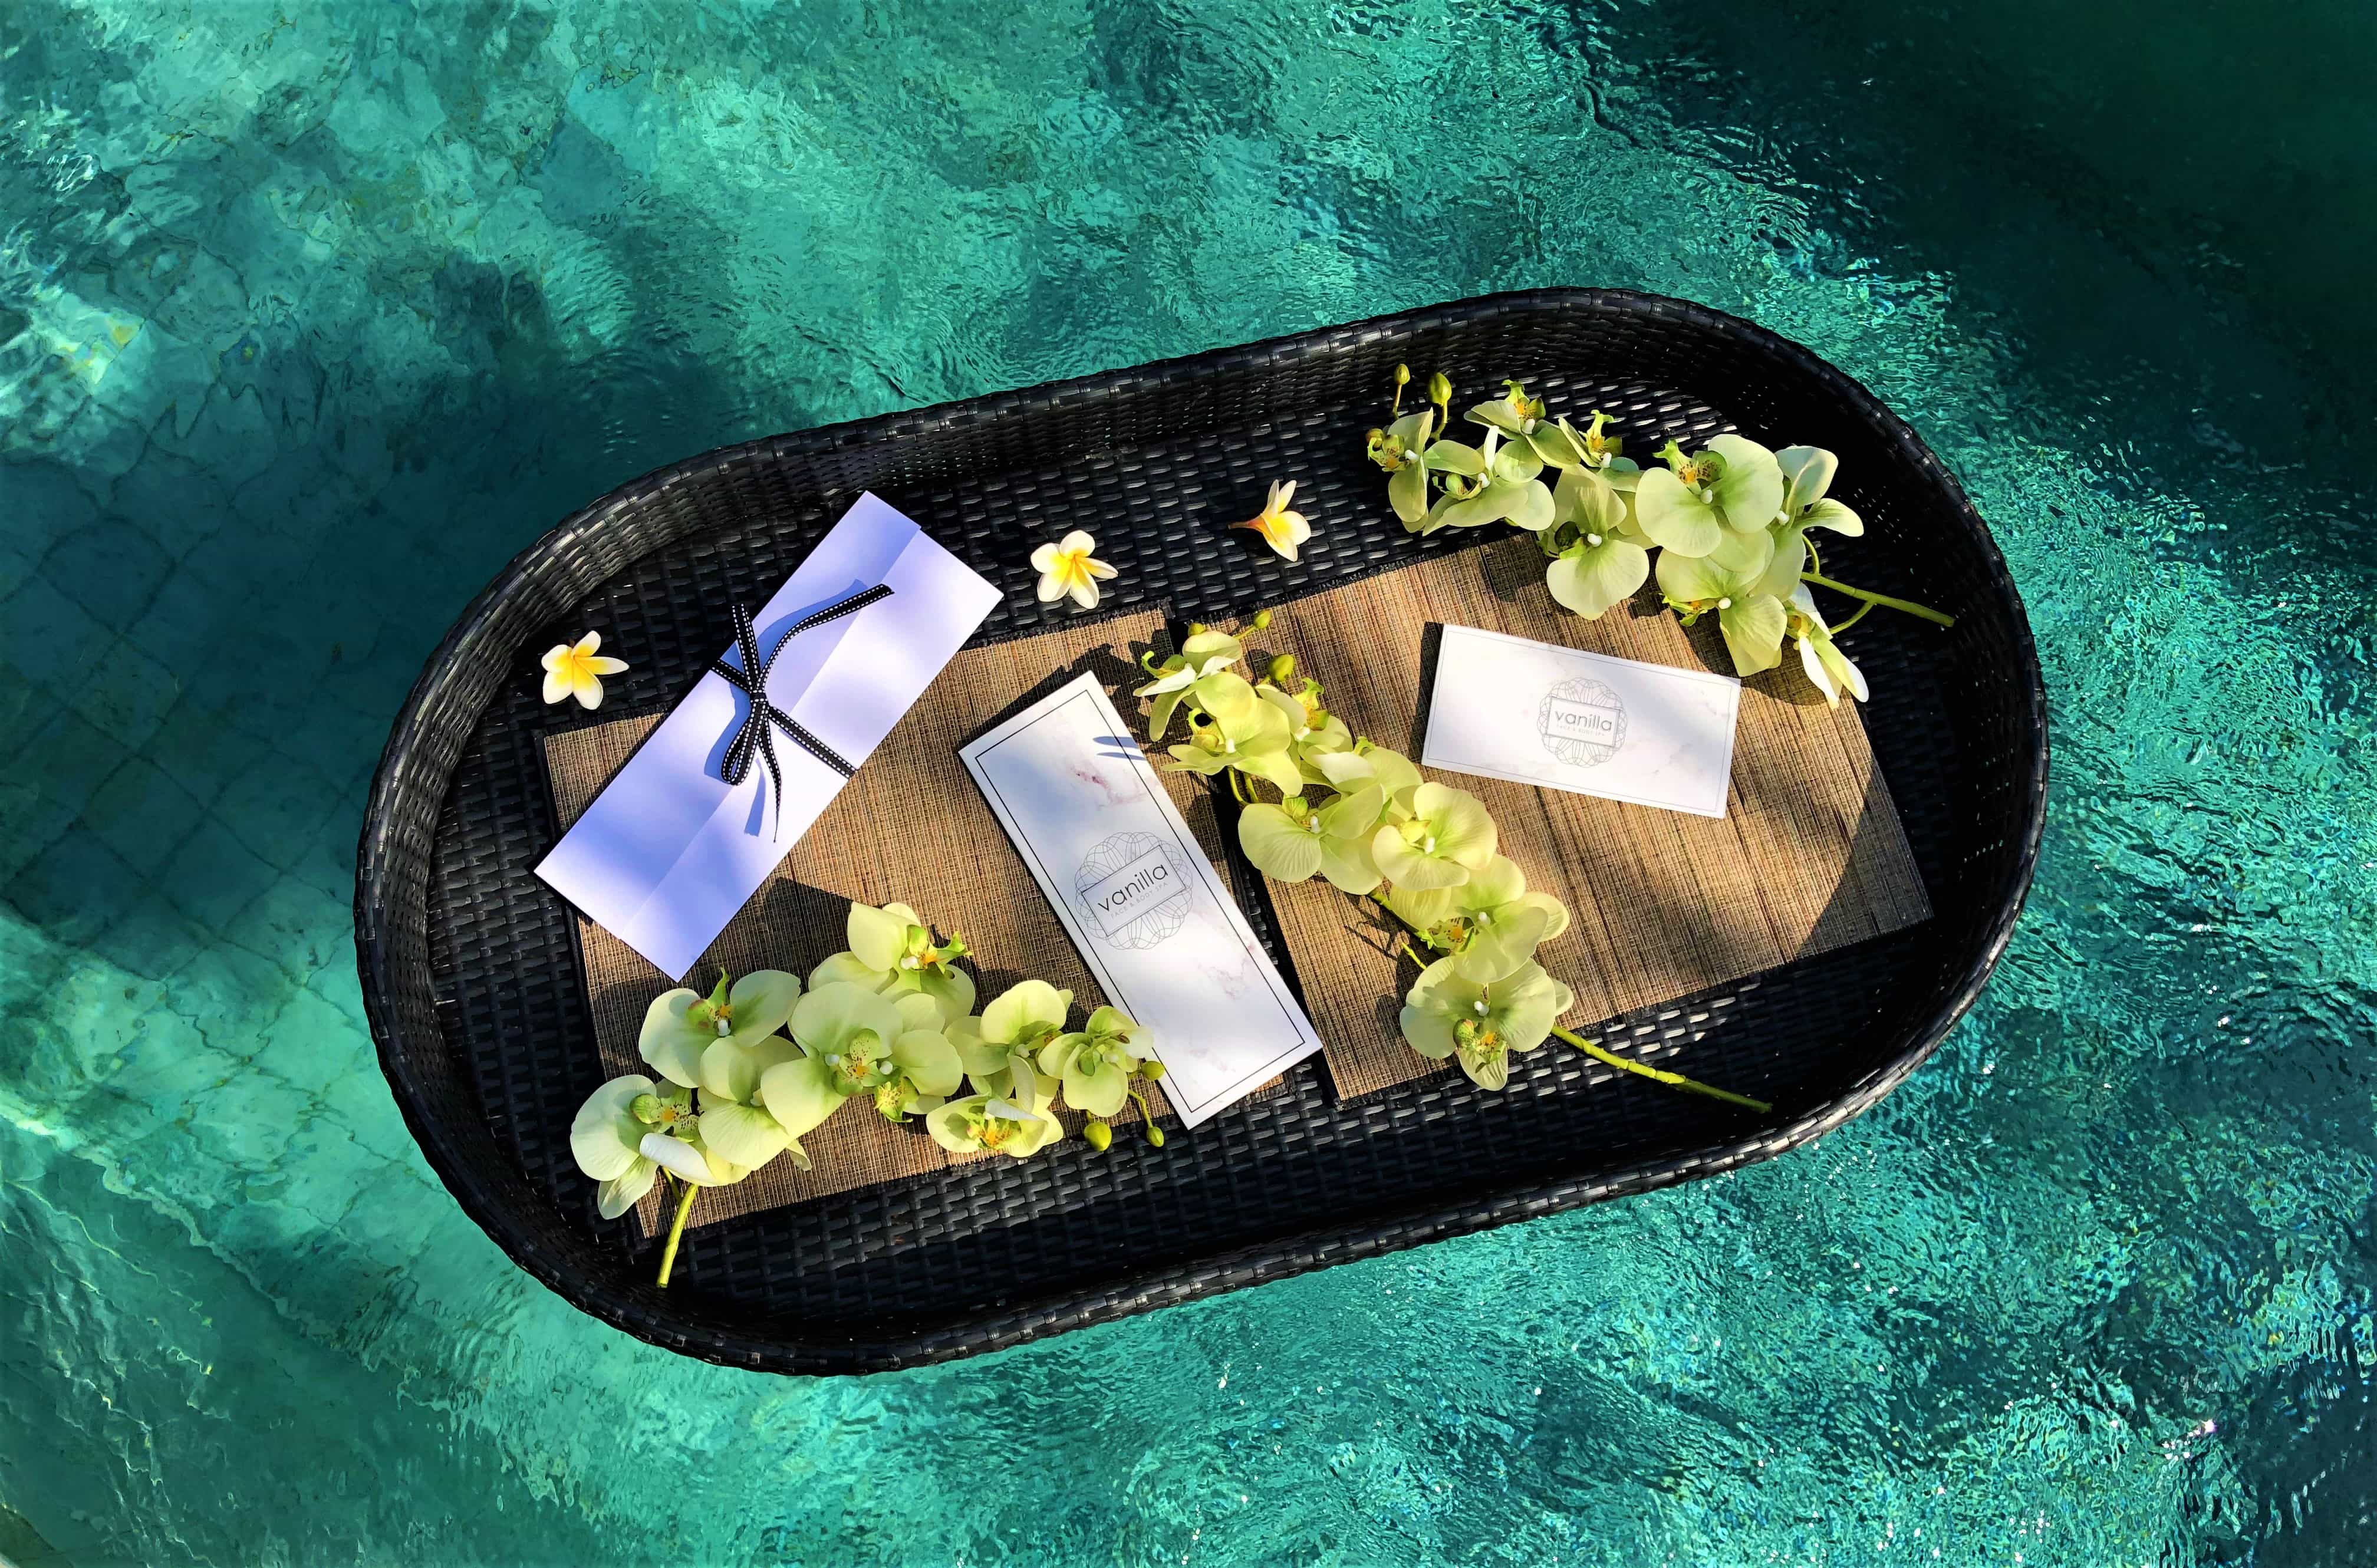 treatment menu floating on the water